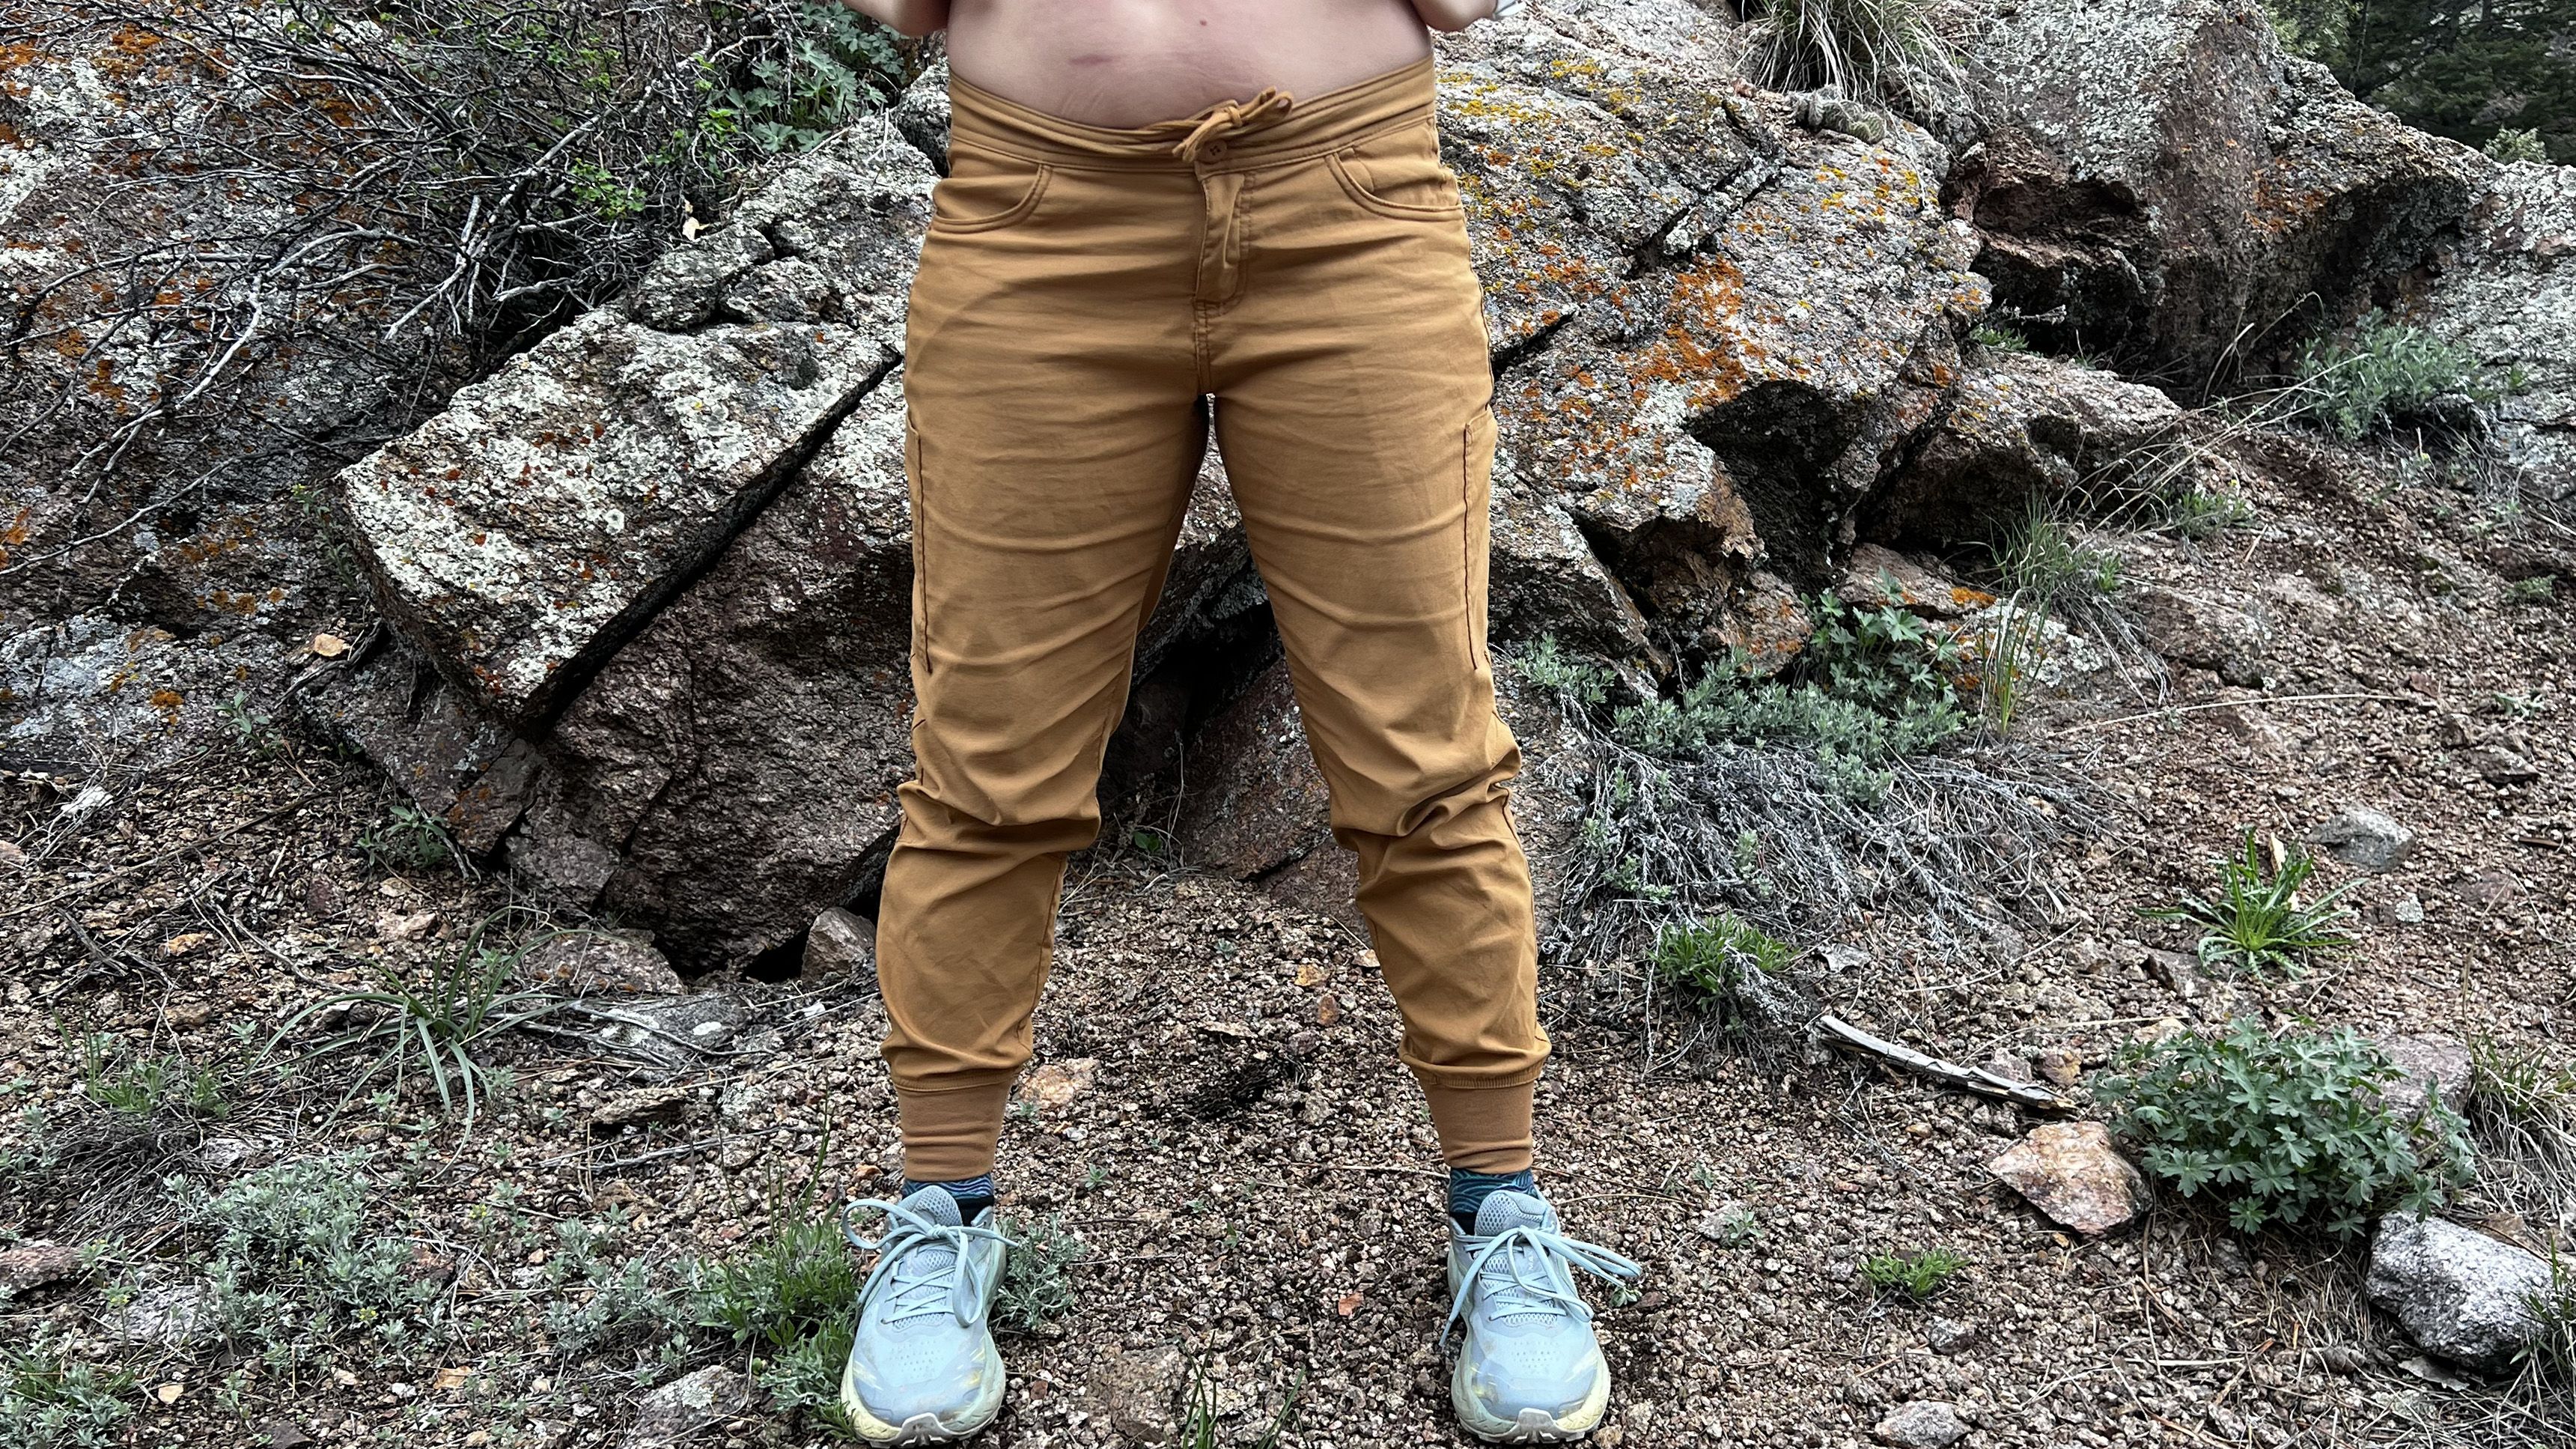 Prana Halle Jogger II review: Style from trail to town